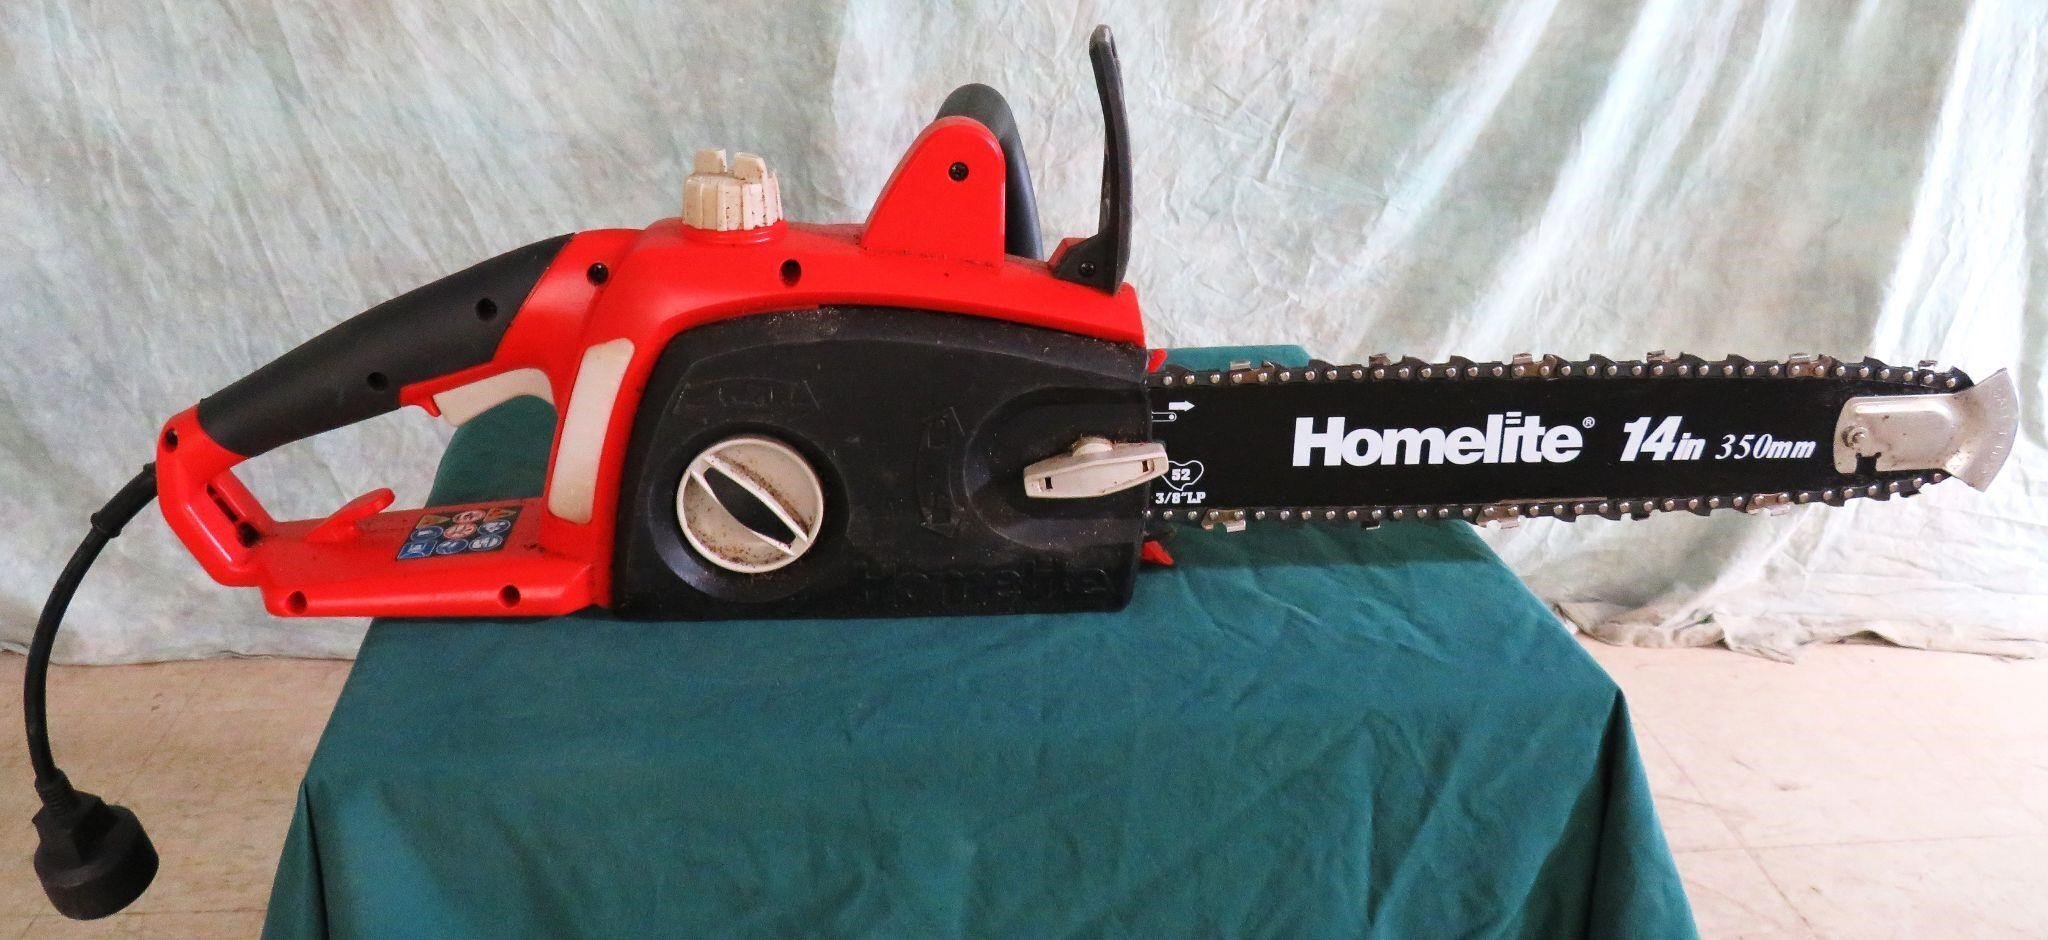 HOMELITE 14" ELECTRIC CHAINSAW